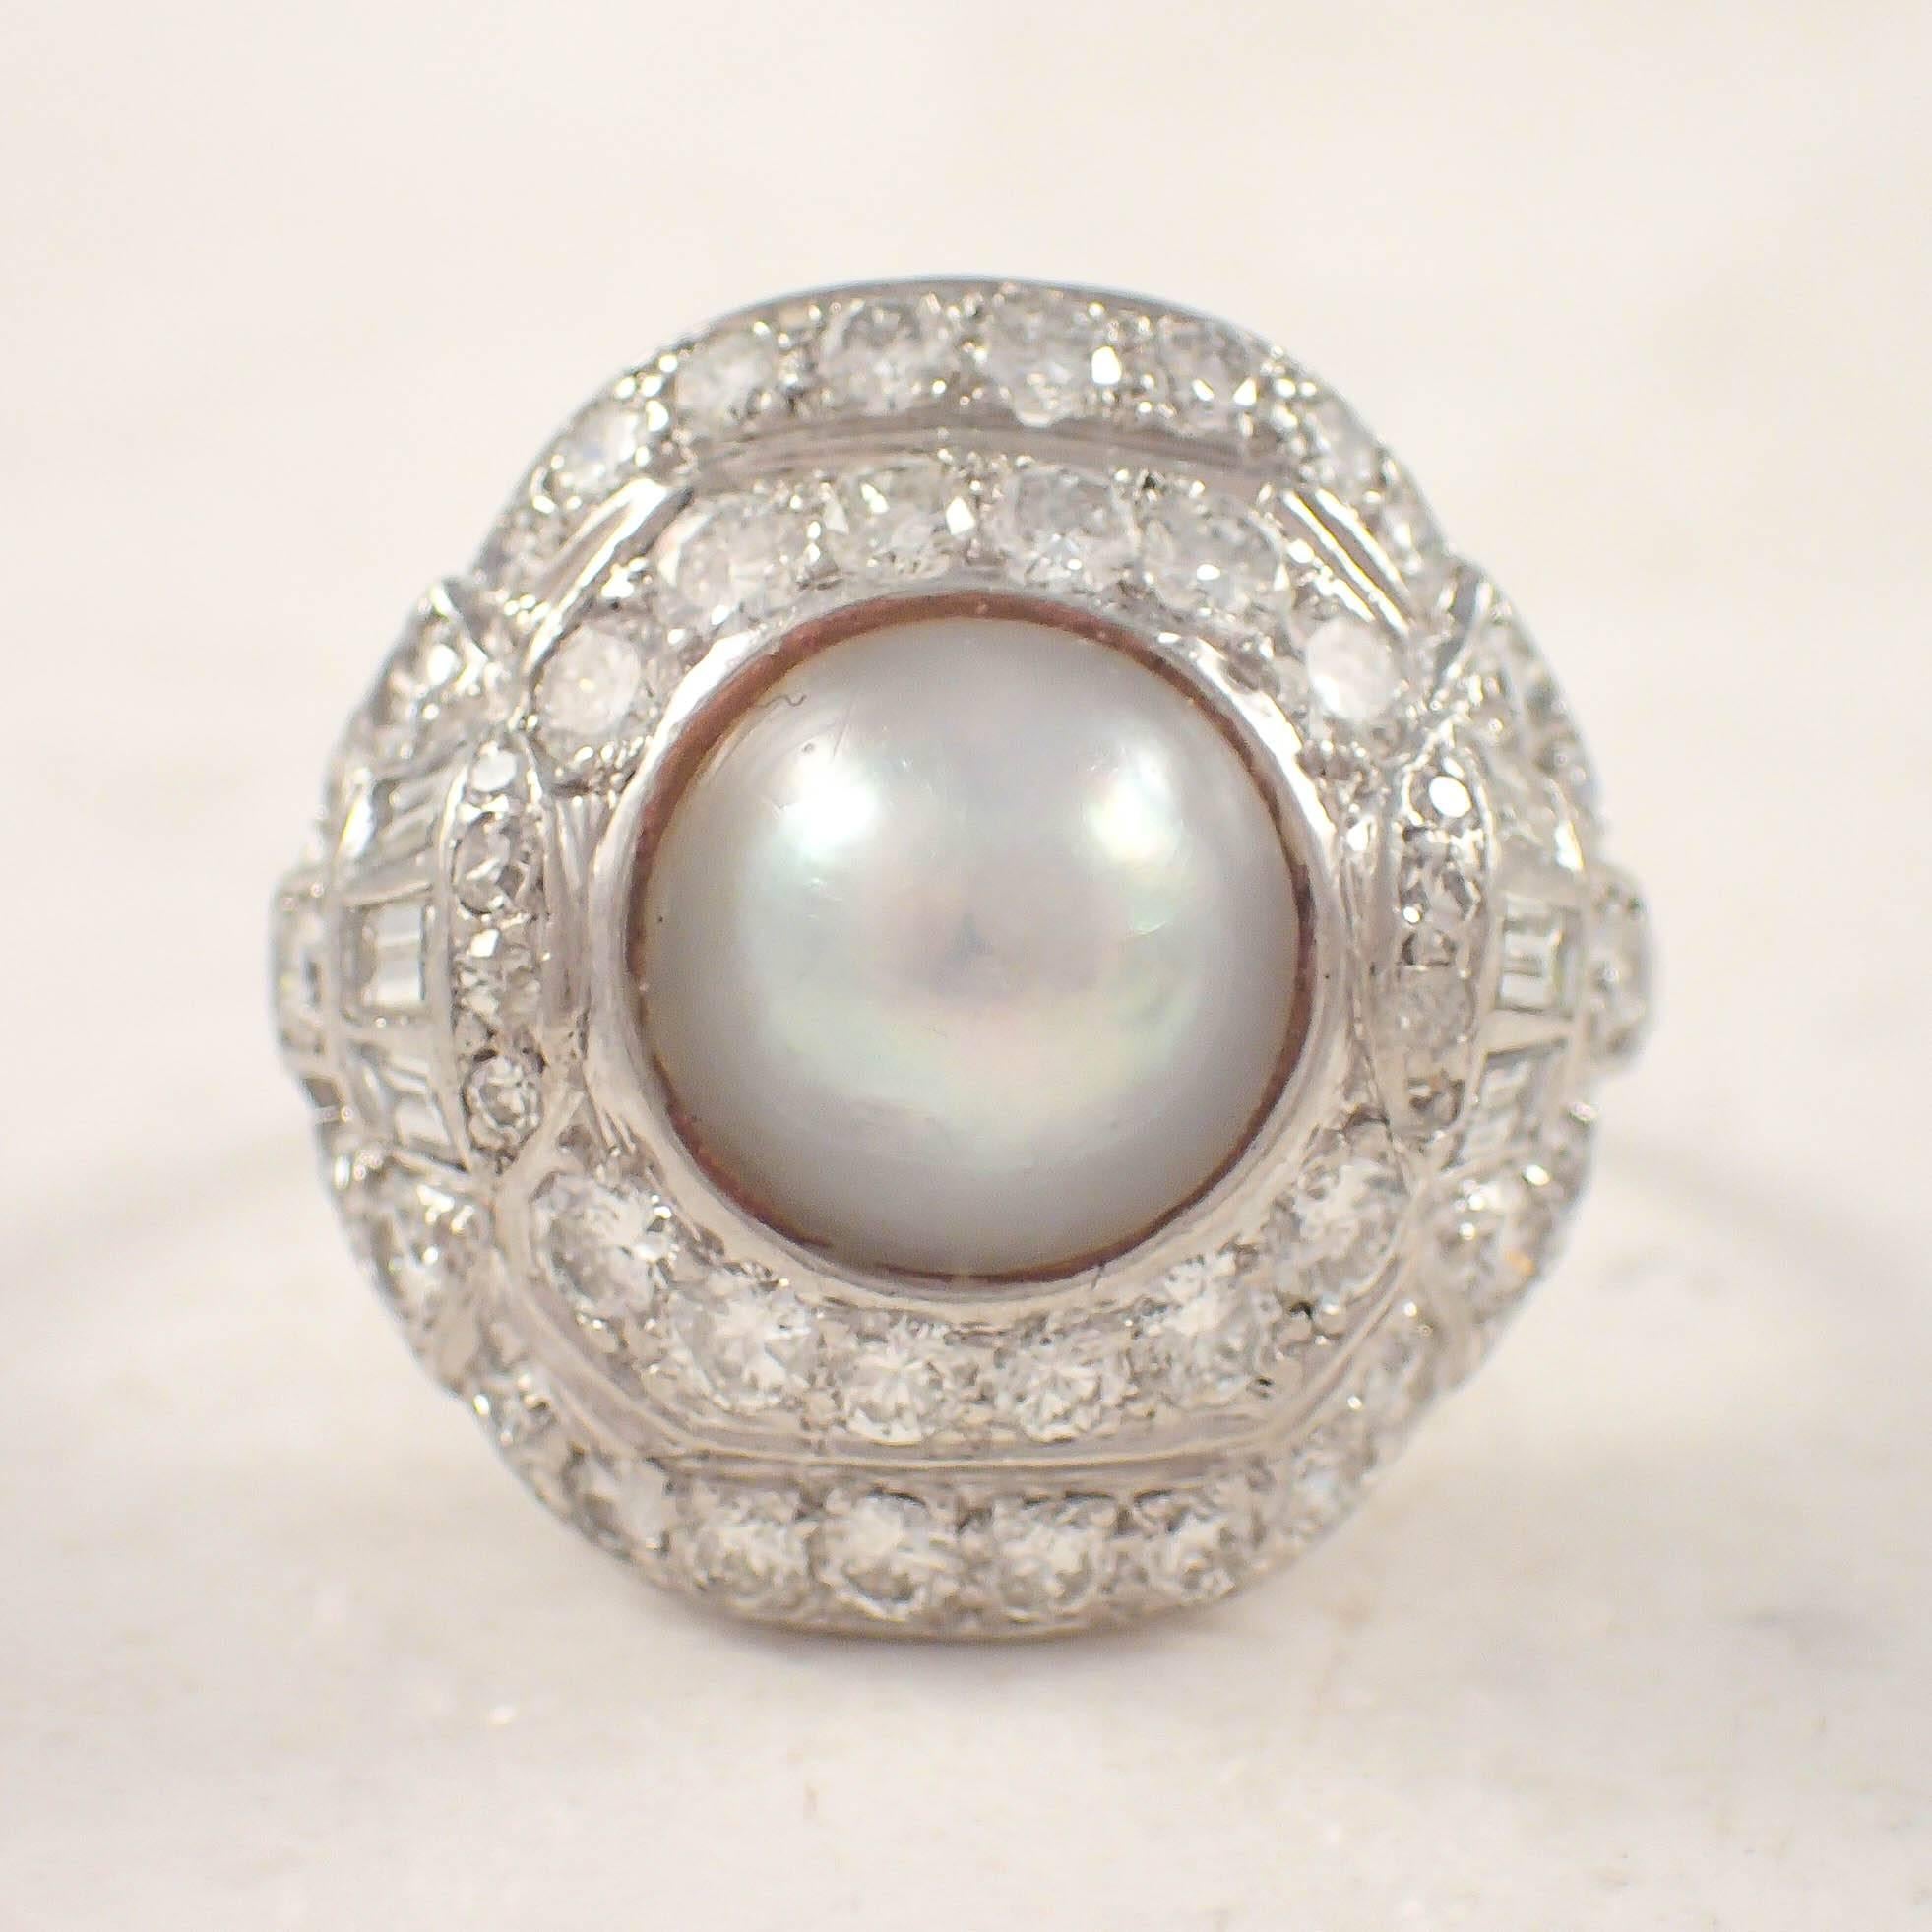 Art Deco platinum pearl and diamond ring. The domed top is set with a half pearl measuring approximately 8 mm, surrounded by 60 small round diamonds and 6 small baguette diamonds weighing approximately 2.00 carats total. The ring weighs 6.5 grams.